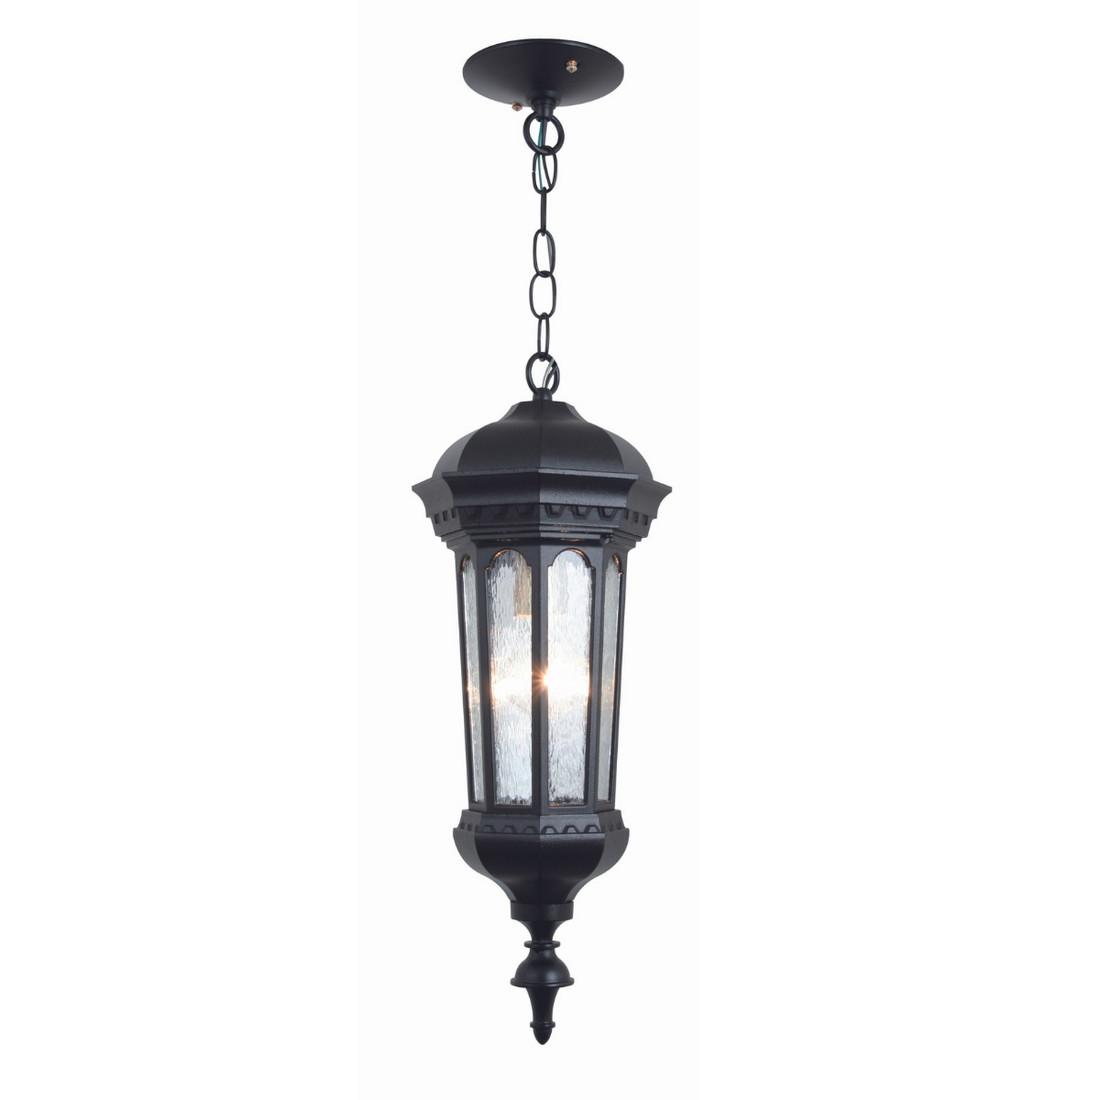 Milan - Ceiling mounting with chain closed bottom small format - 10355